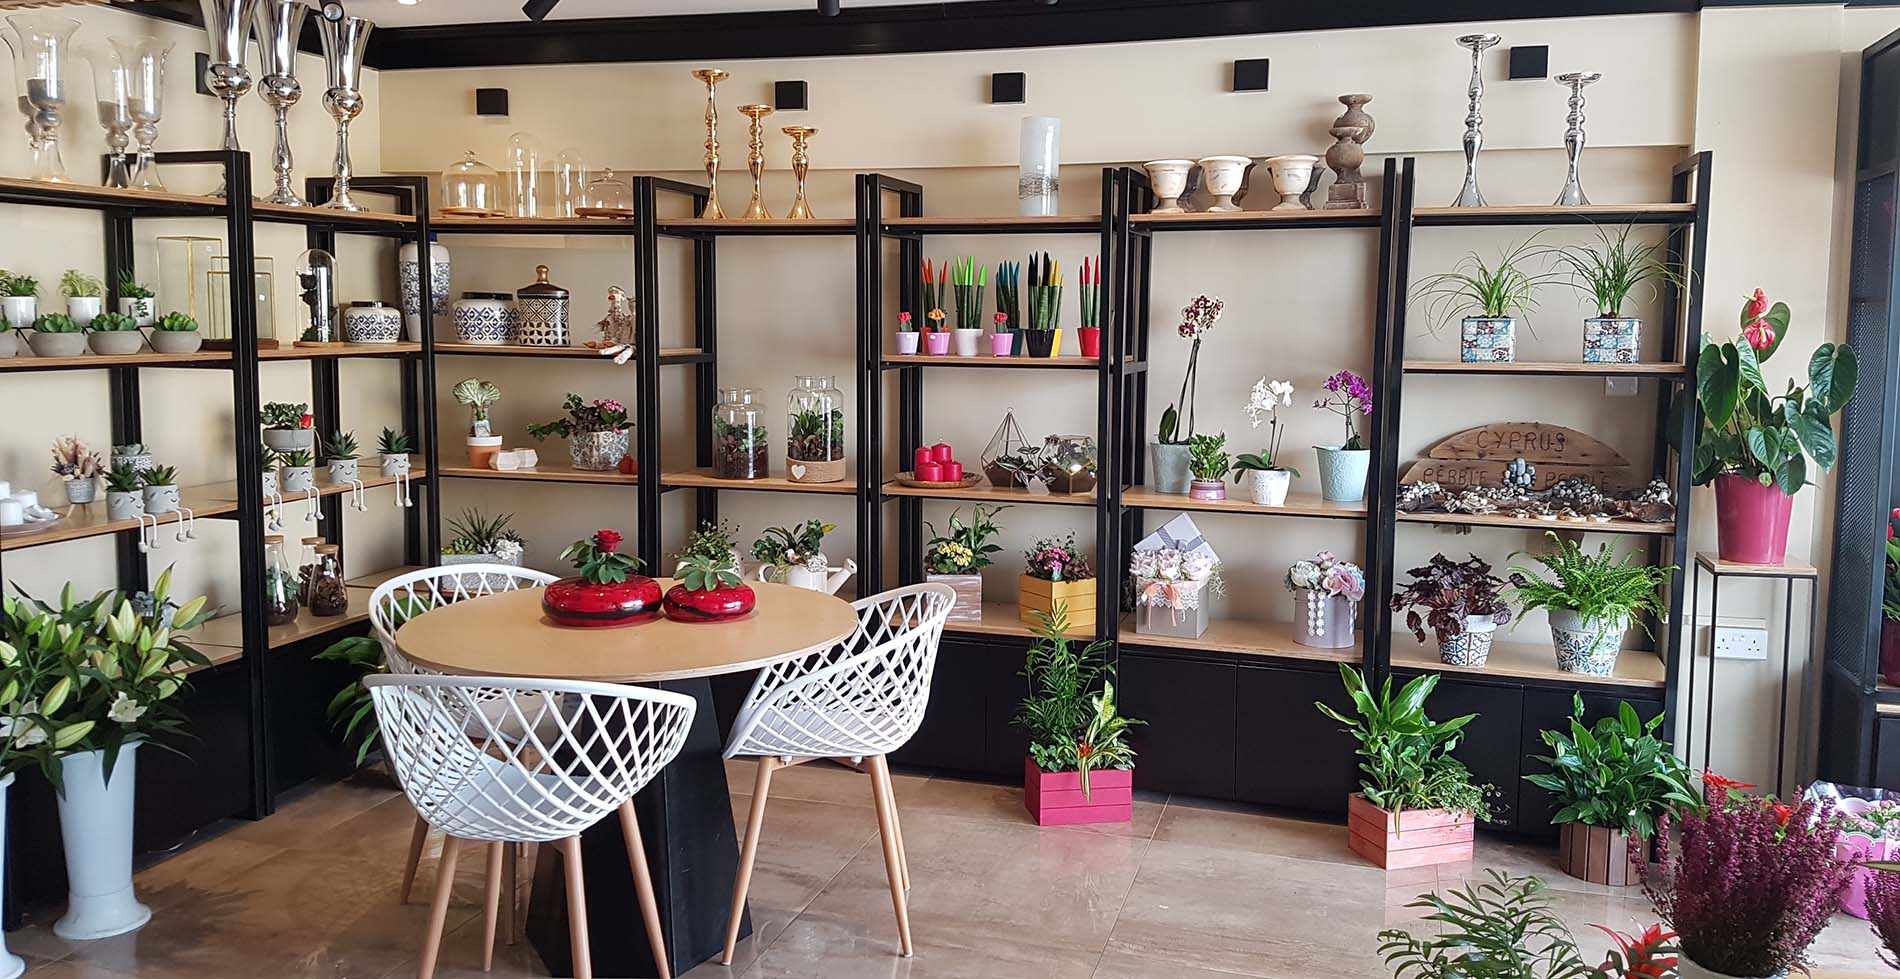 Interview with the owners of Arocaria Flower Shop in Ayia Napa